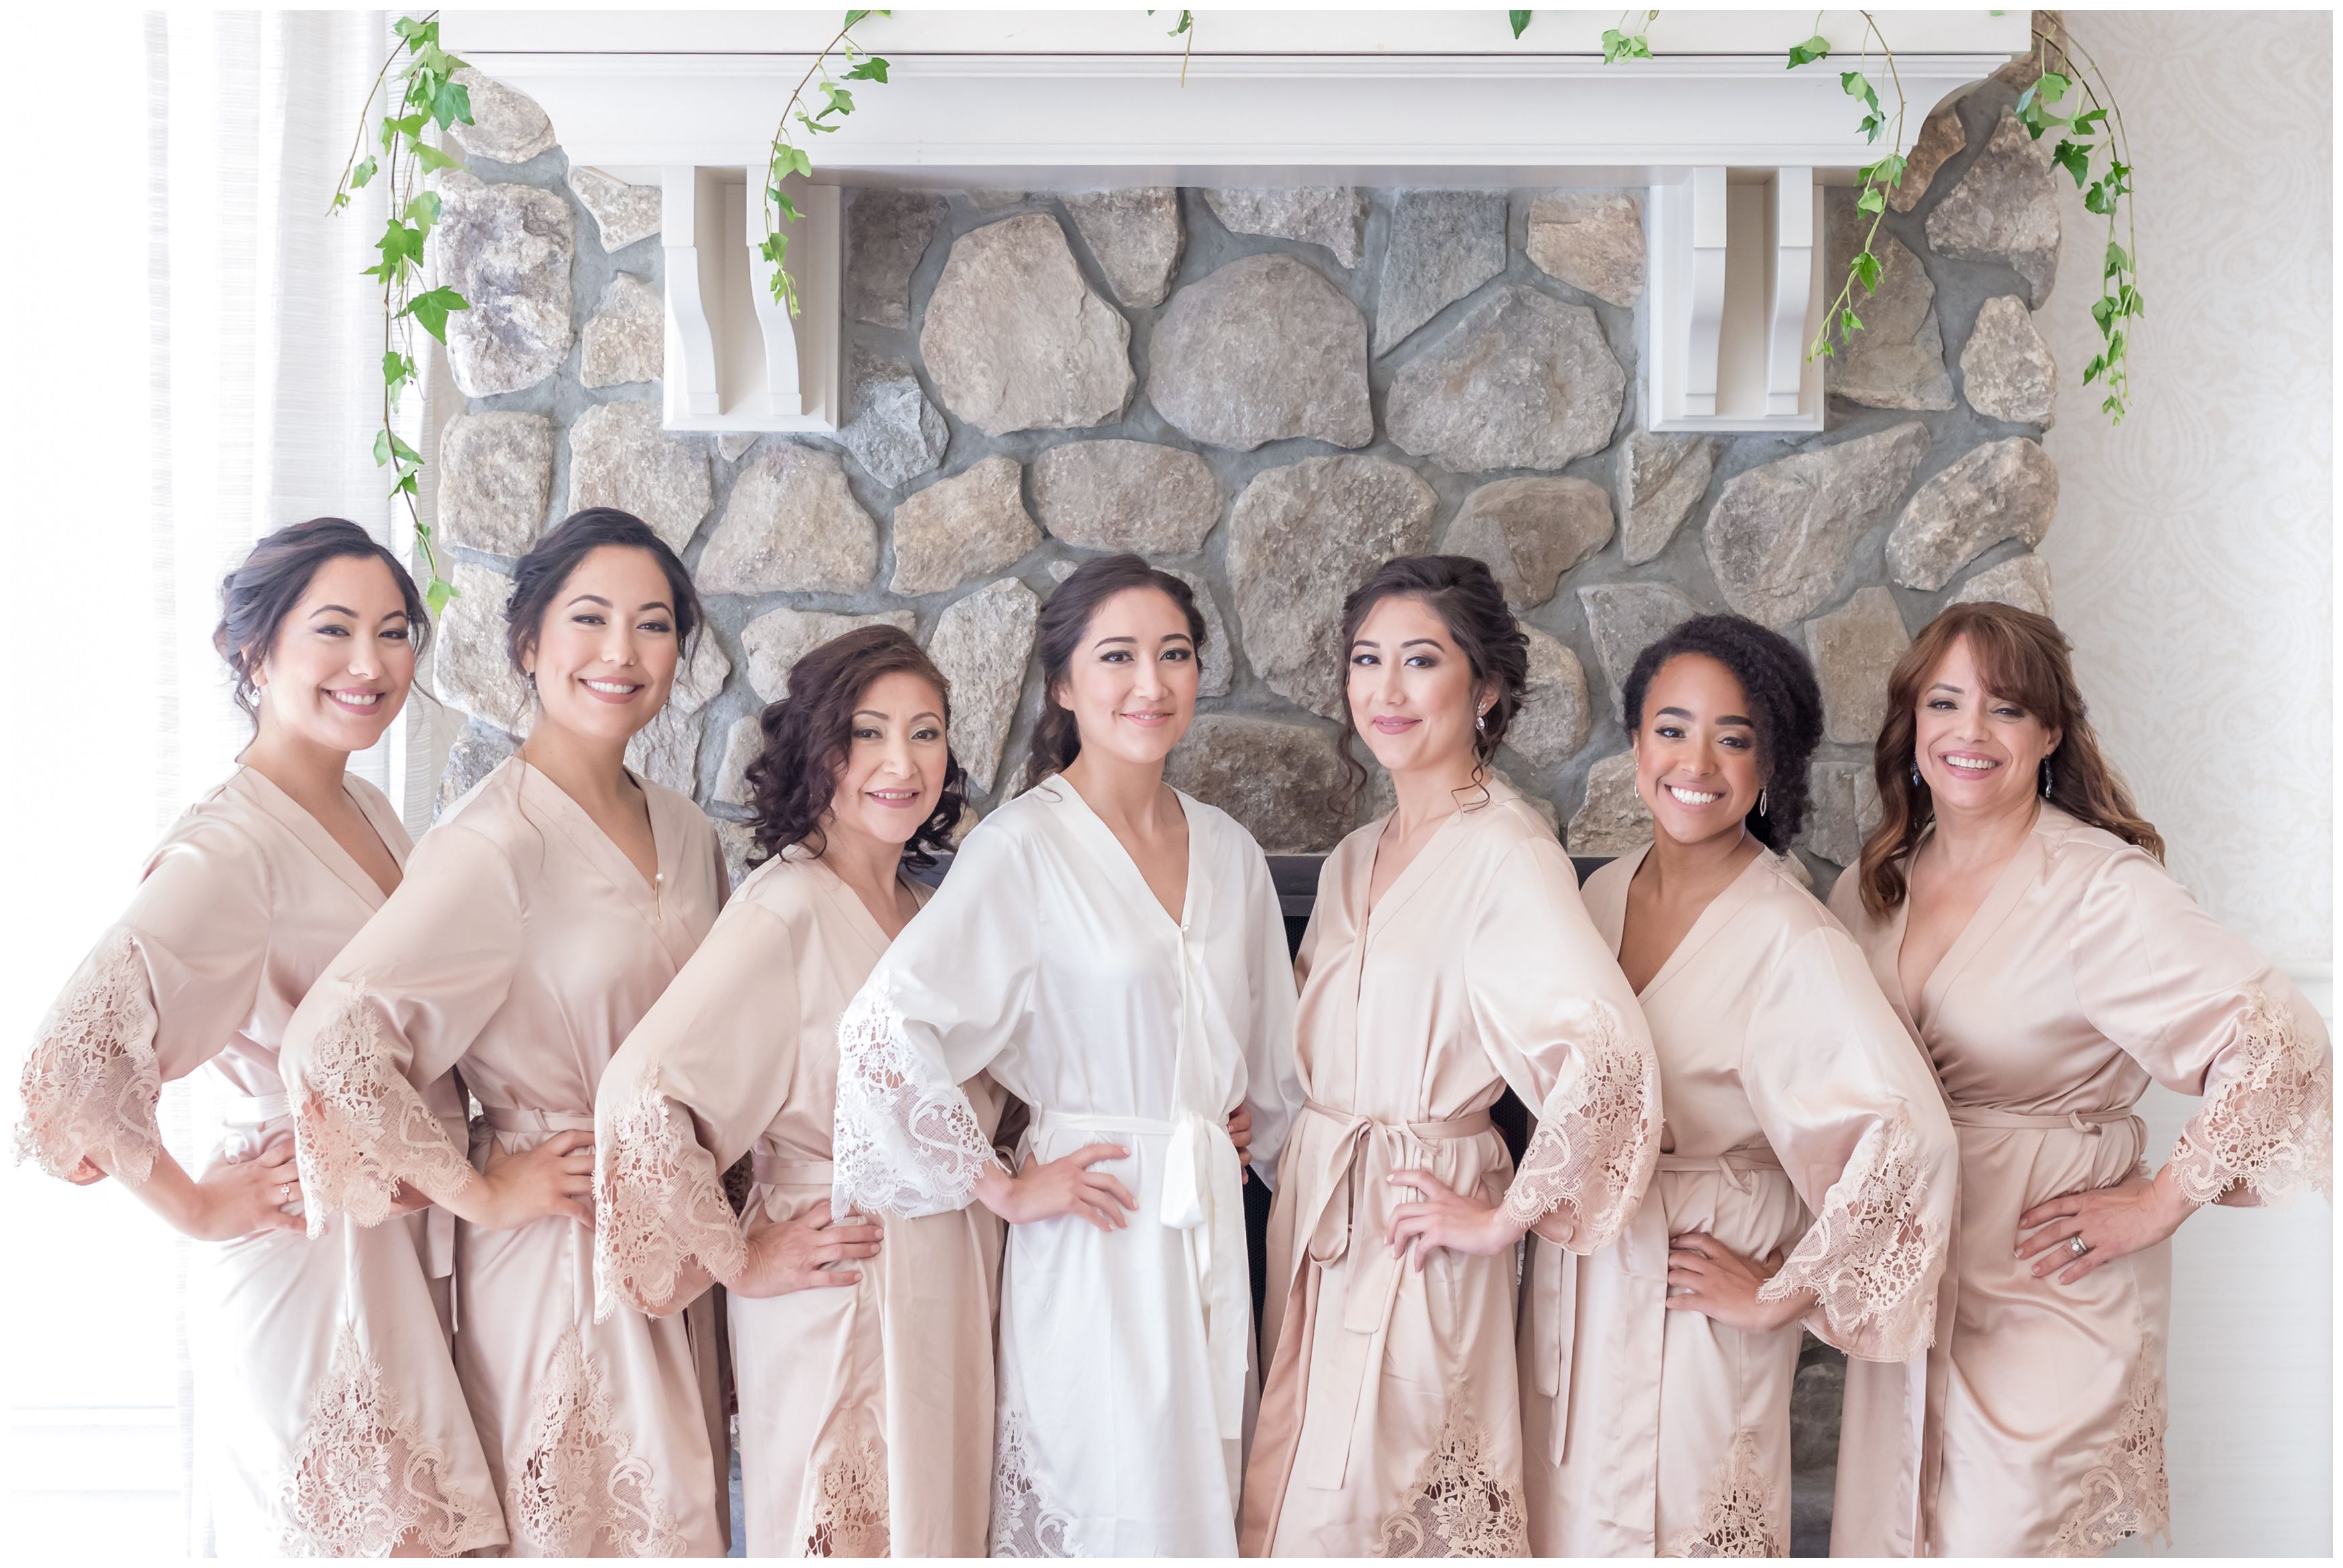 Bride and bridesmaids getting ready in bridal robes